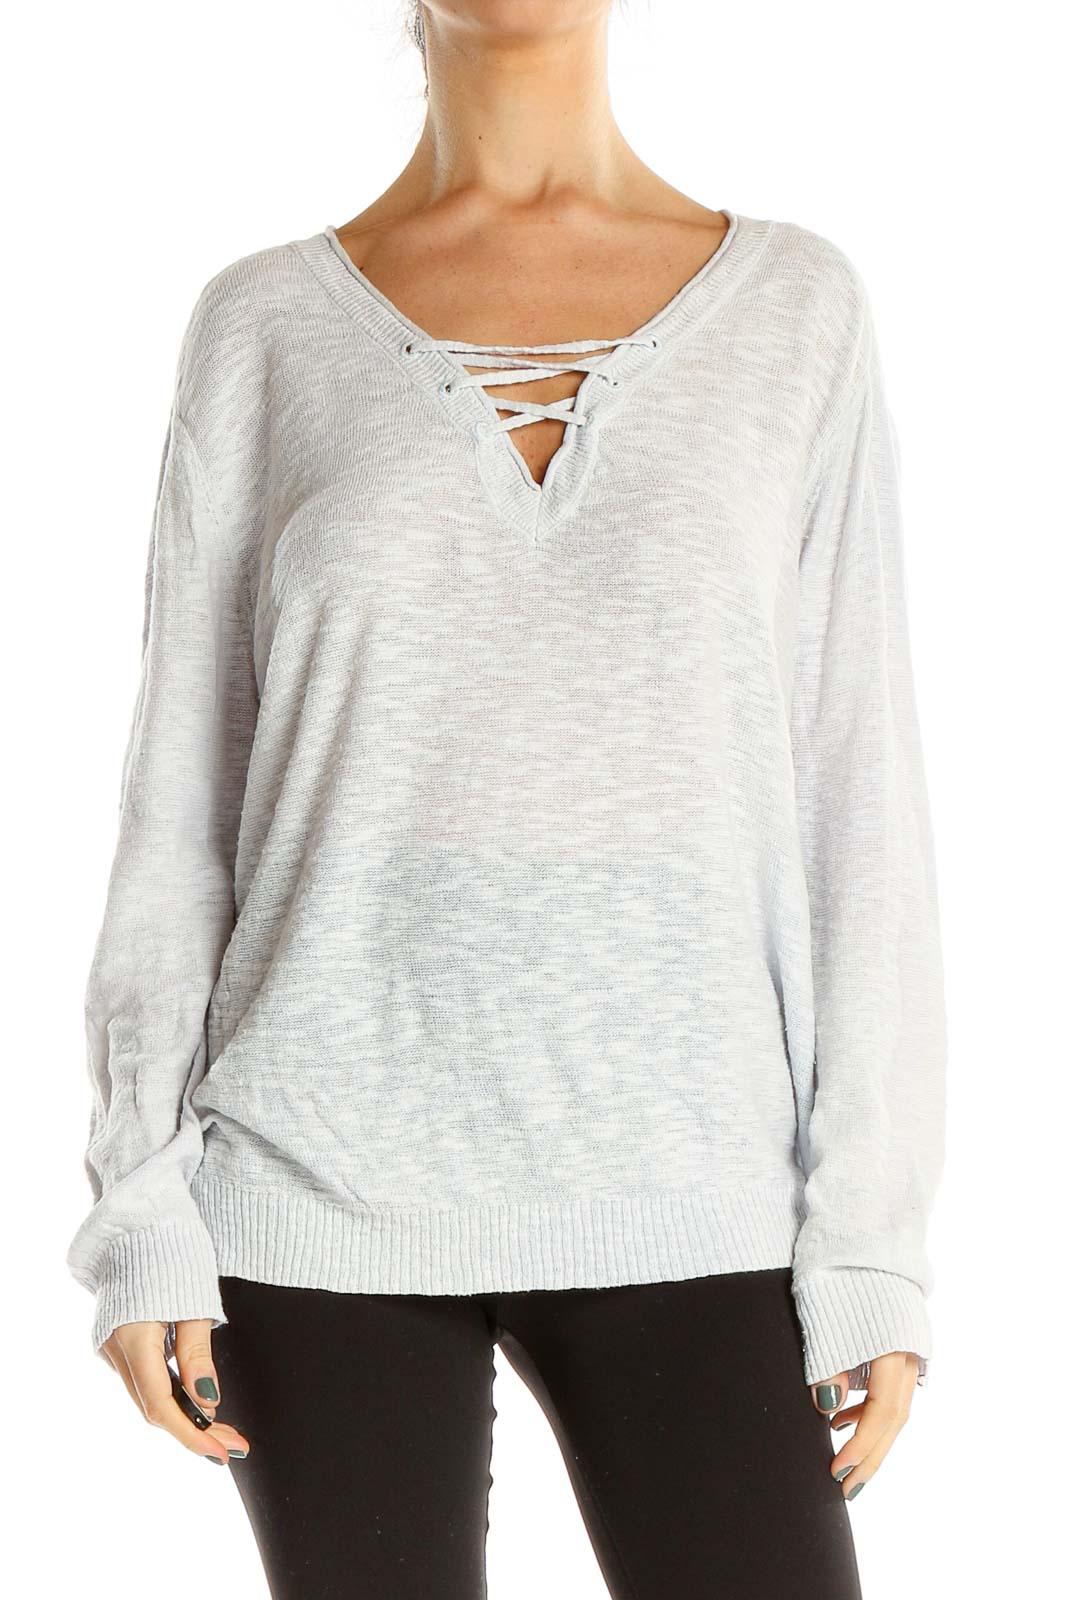 Gray Lace Up Light Sweater Front